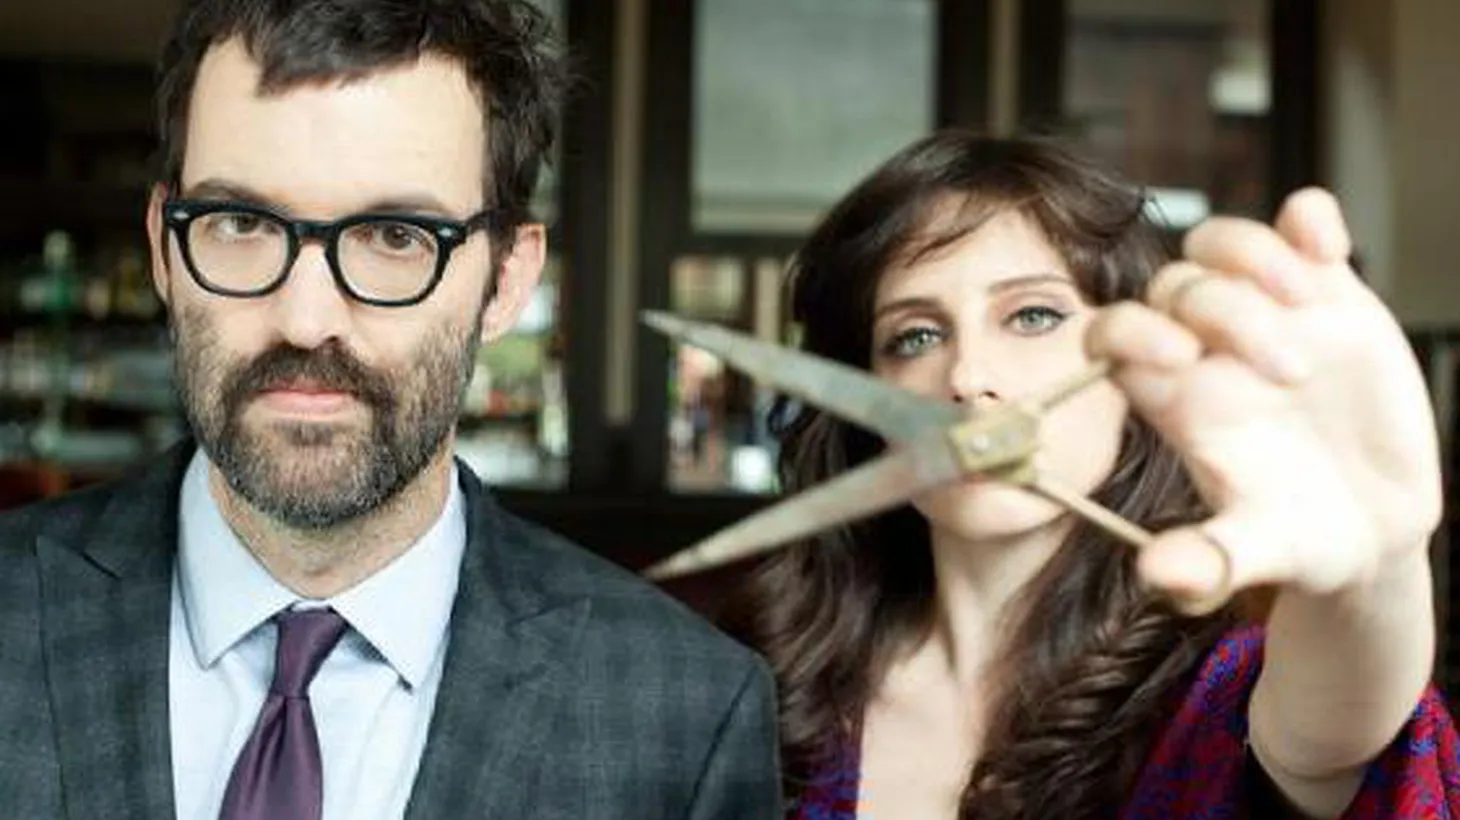 Eels frontman Mark Oliver Everett (best known as E) is a prolific and clever songwriter.